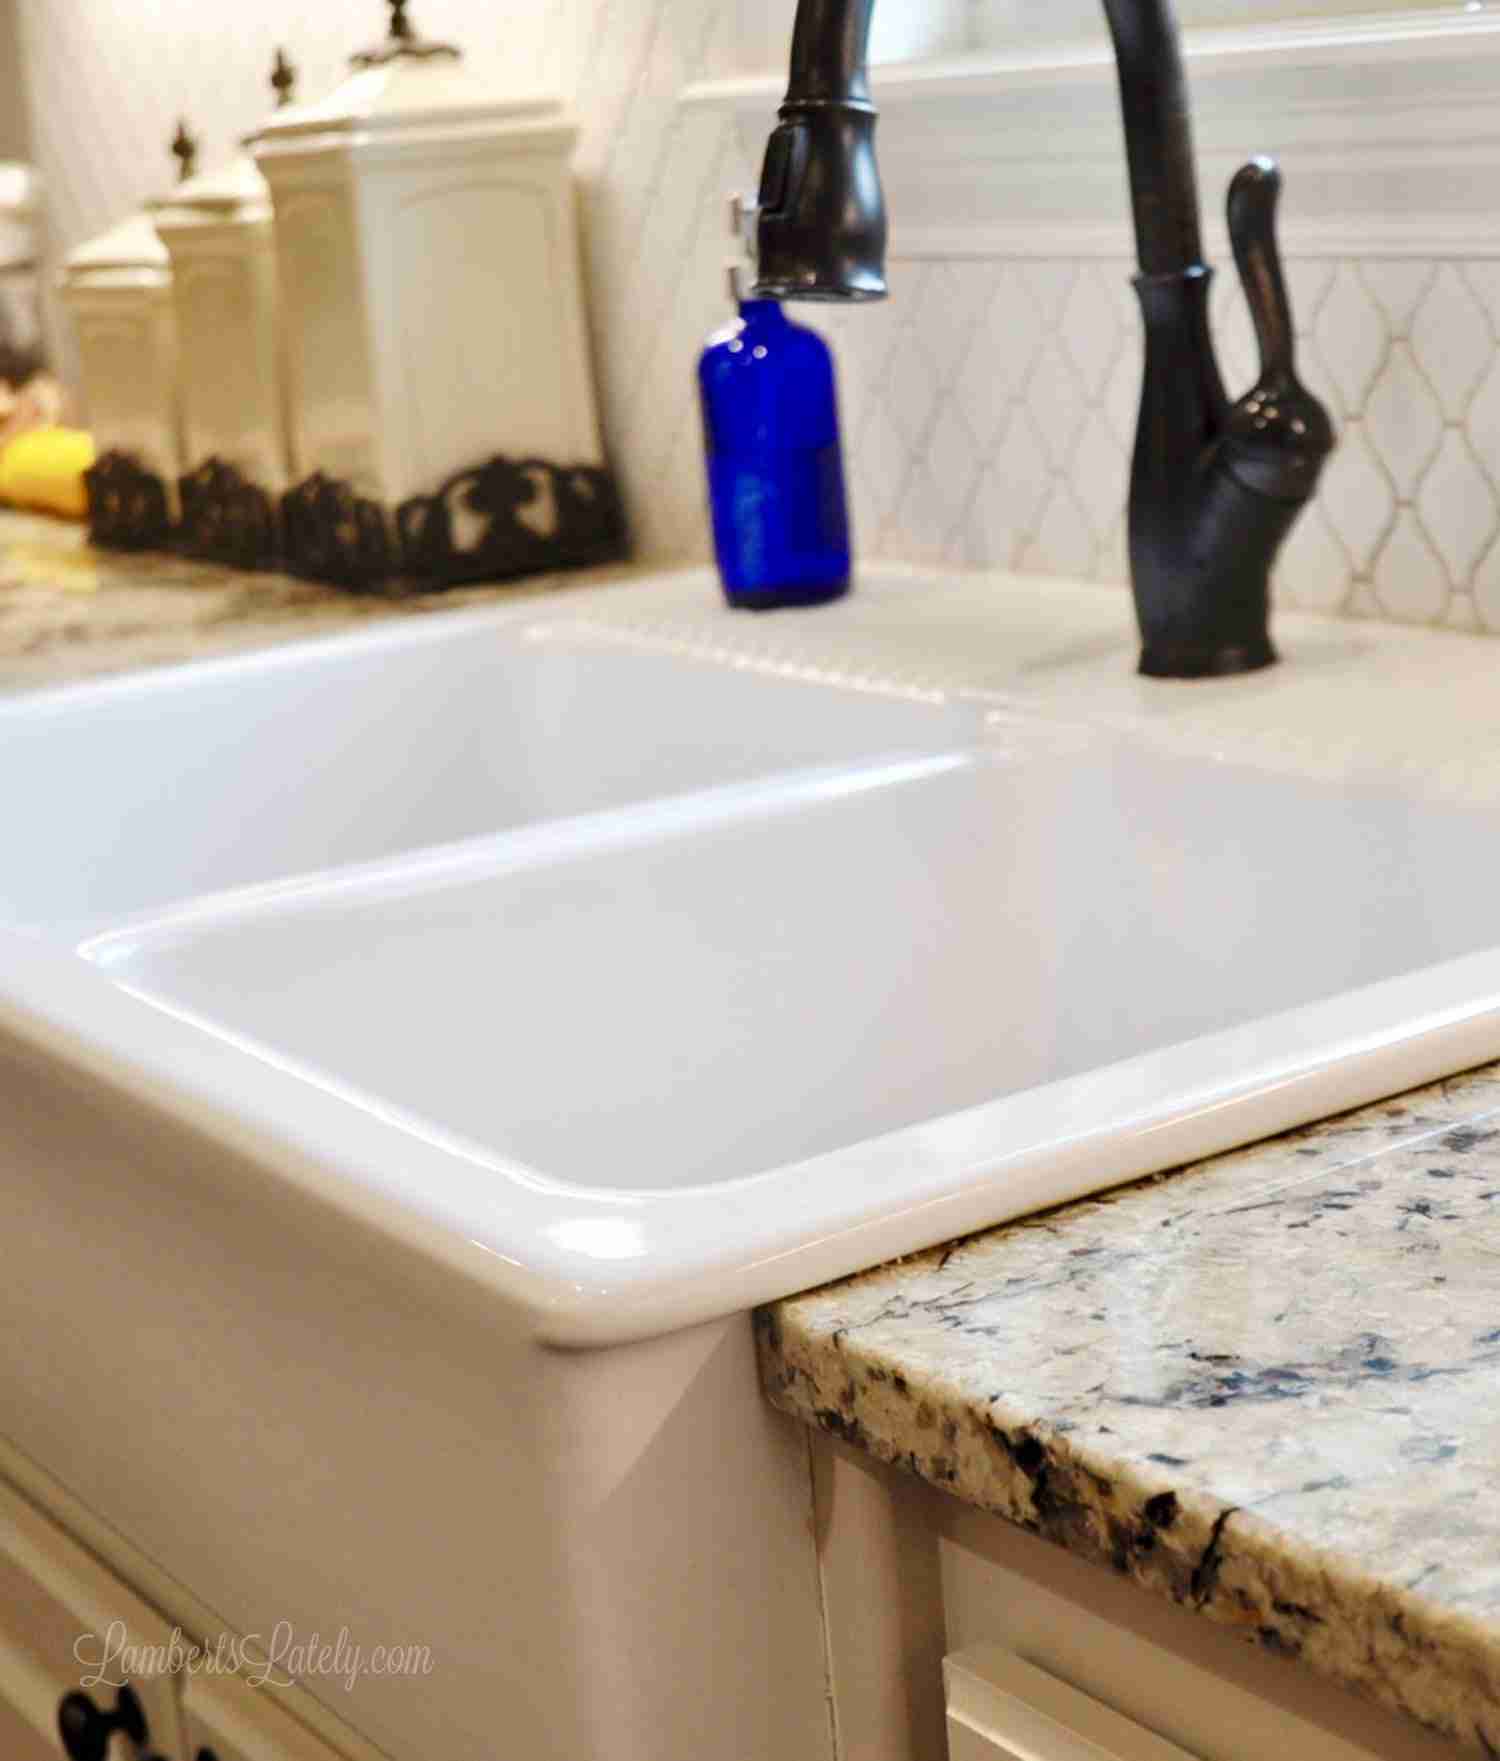 how to clean a porcelain sink - after